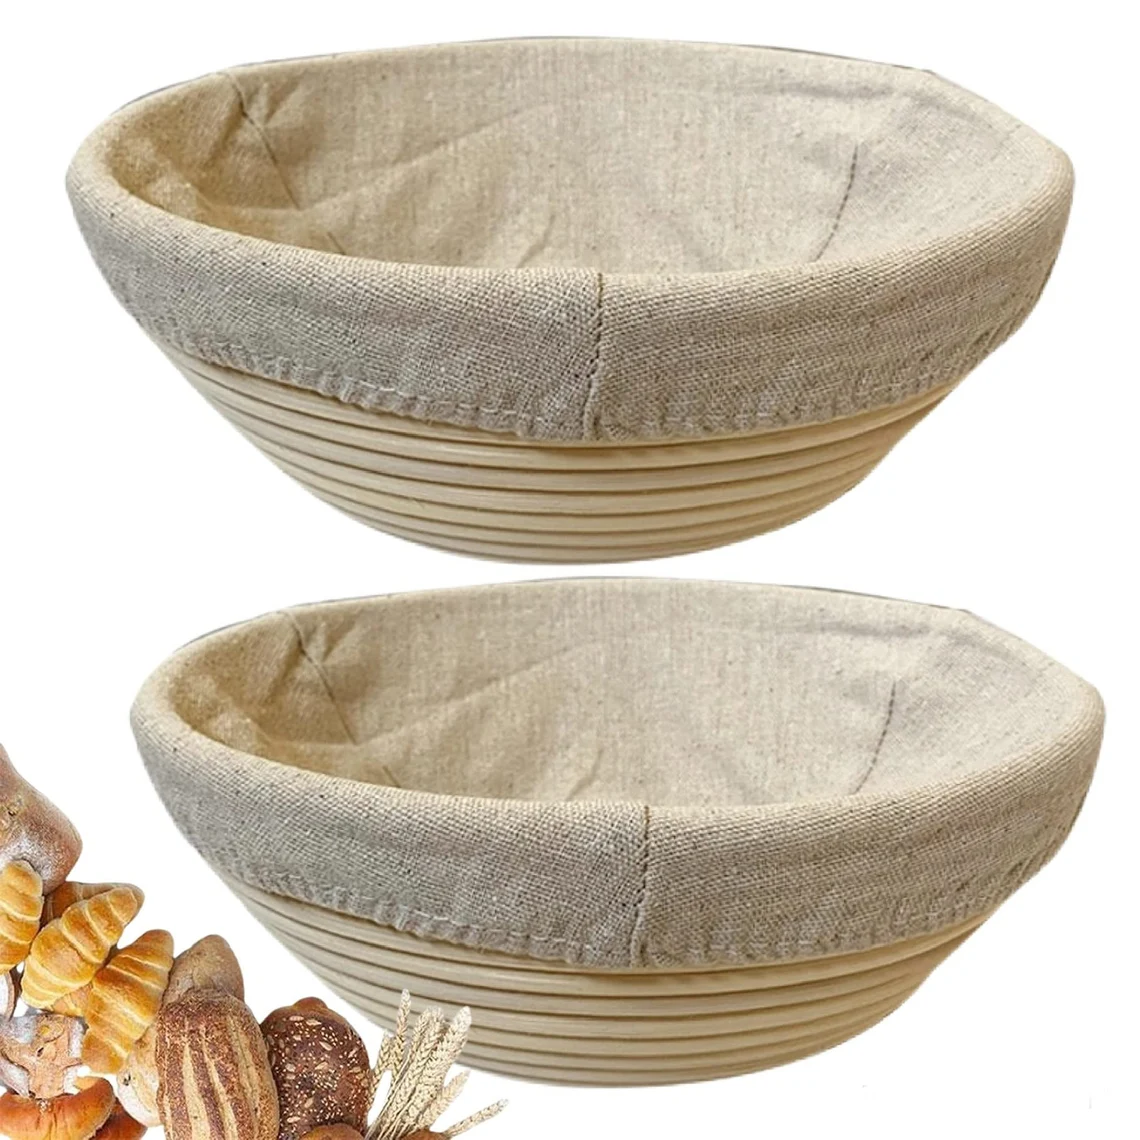 Silicone Bread Proofing Baskets Set of 2, 9 Inch Round & 10 Inch